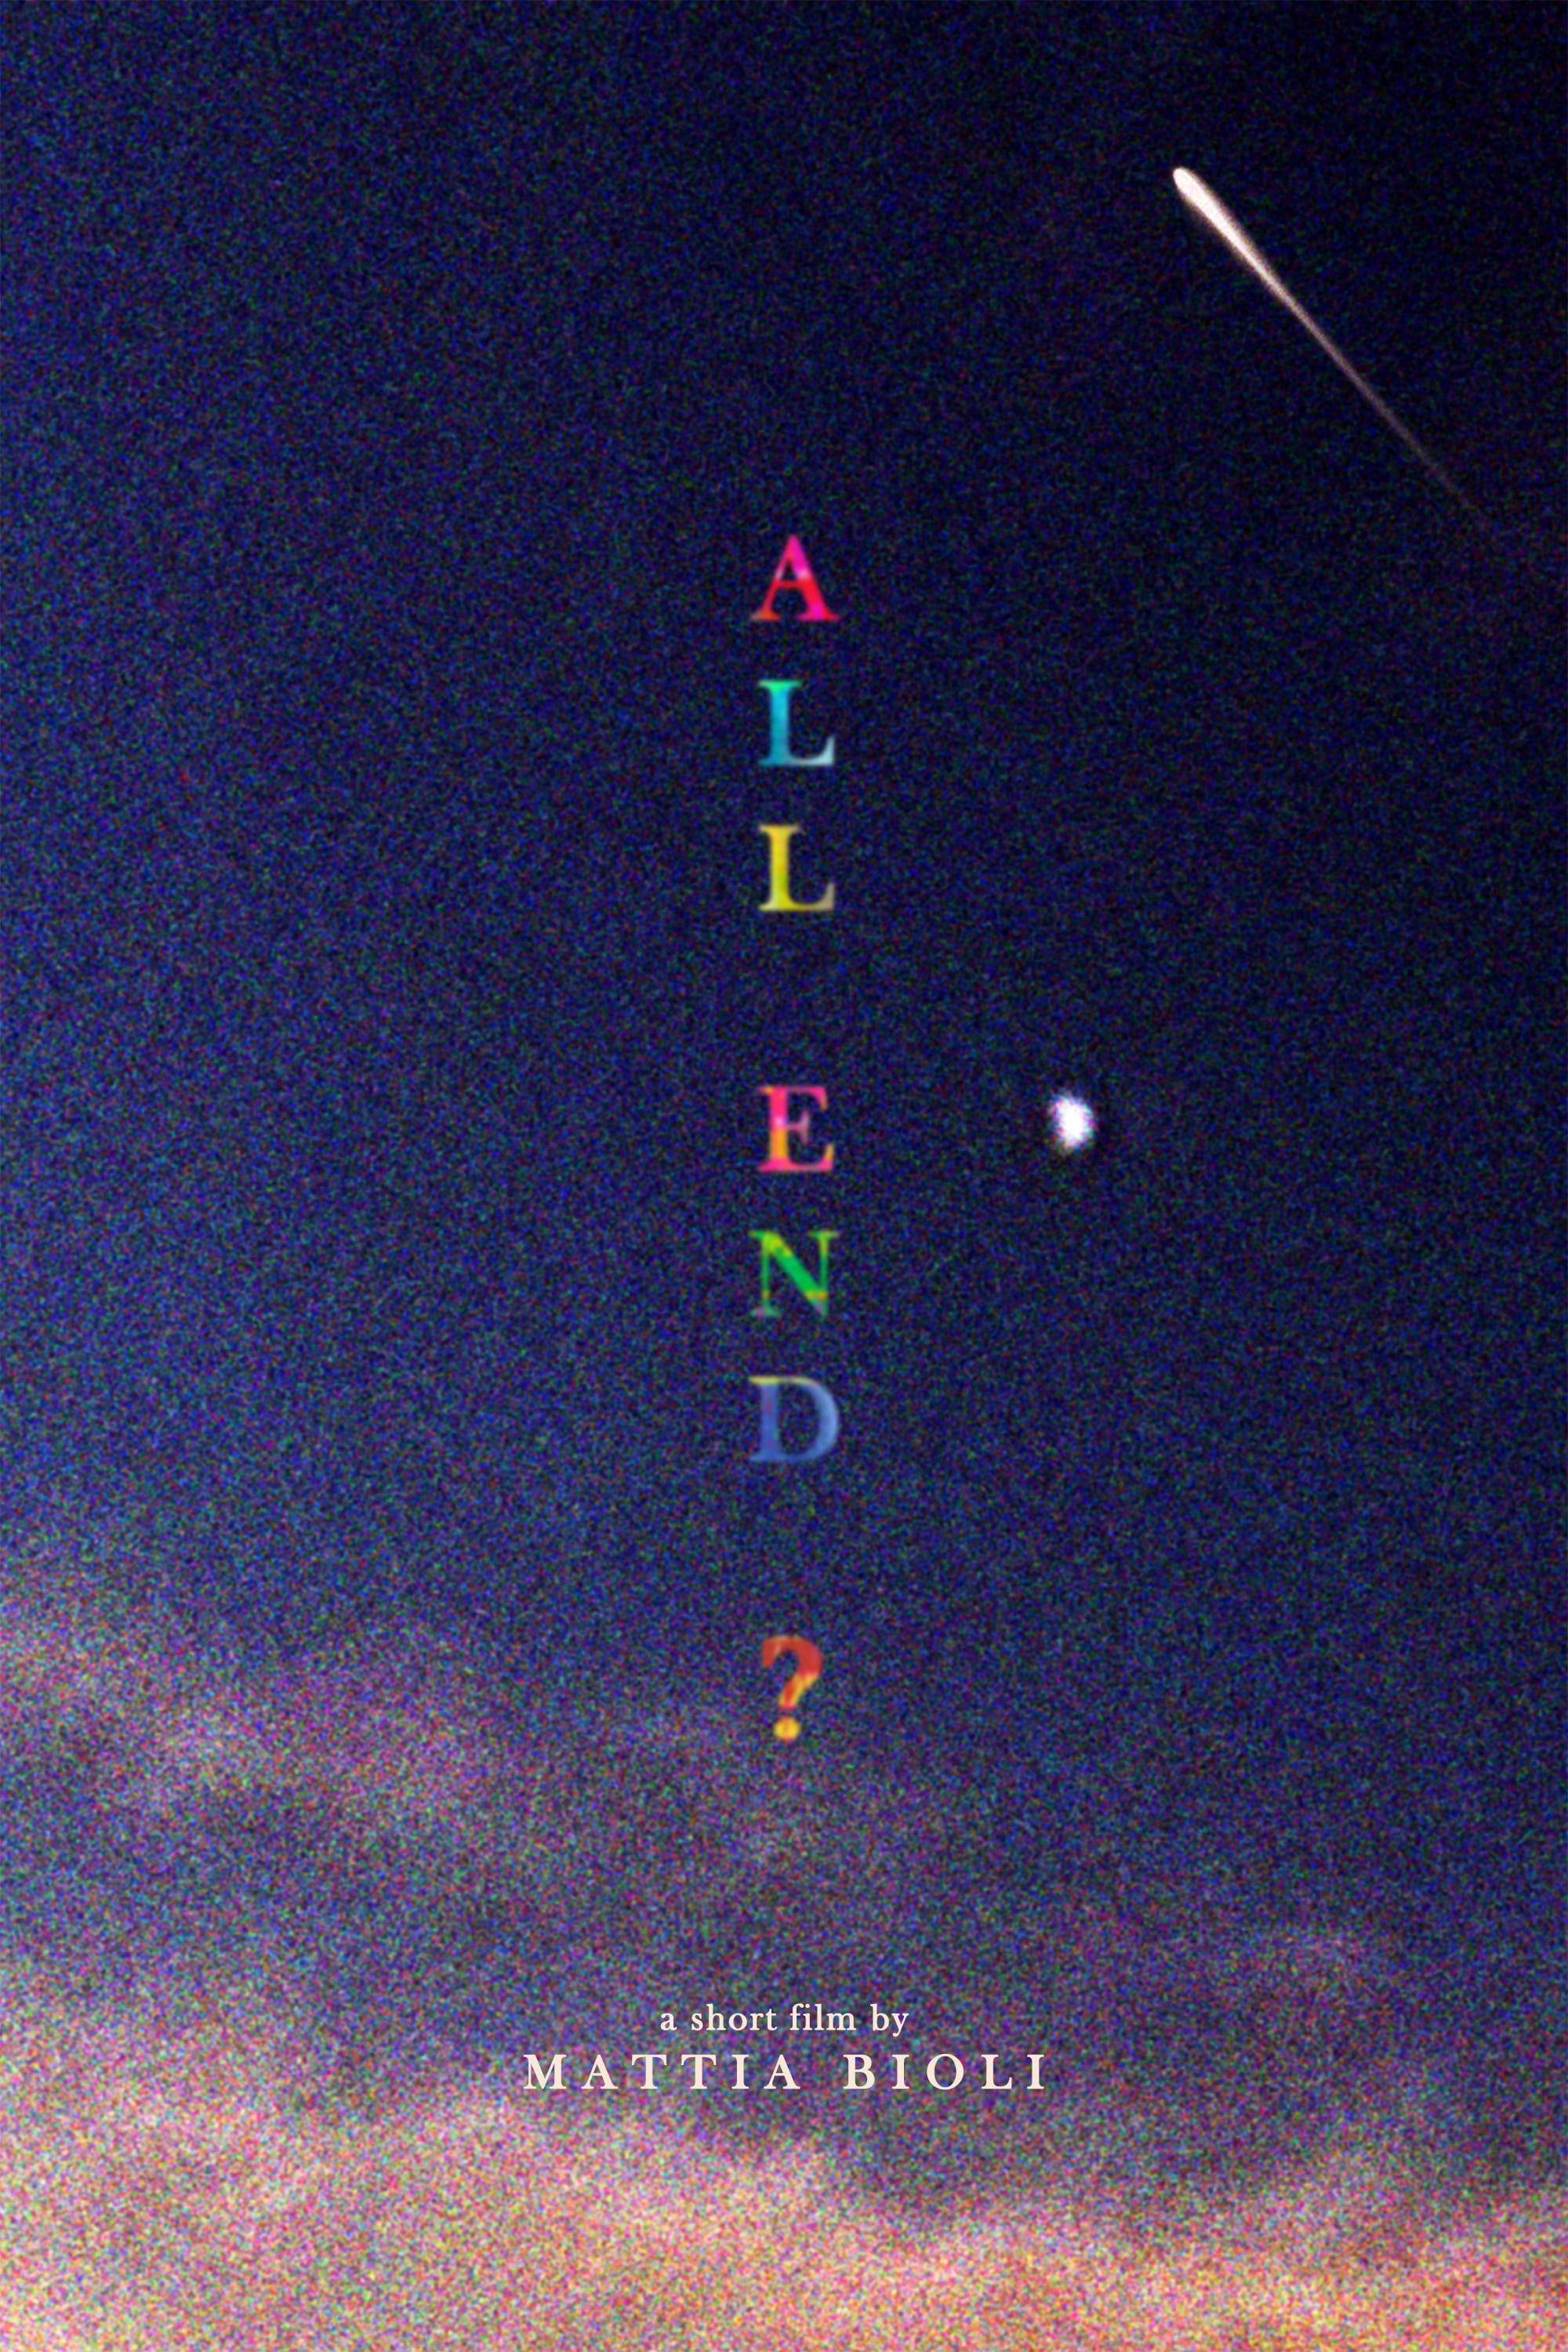 All End? poster